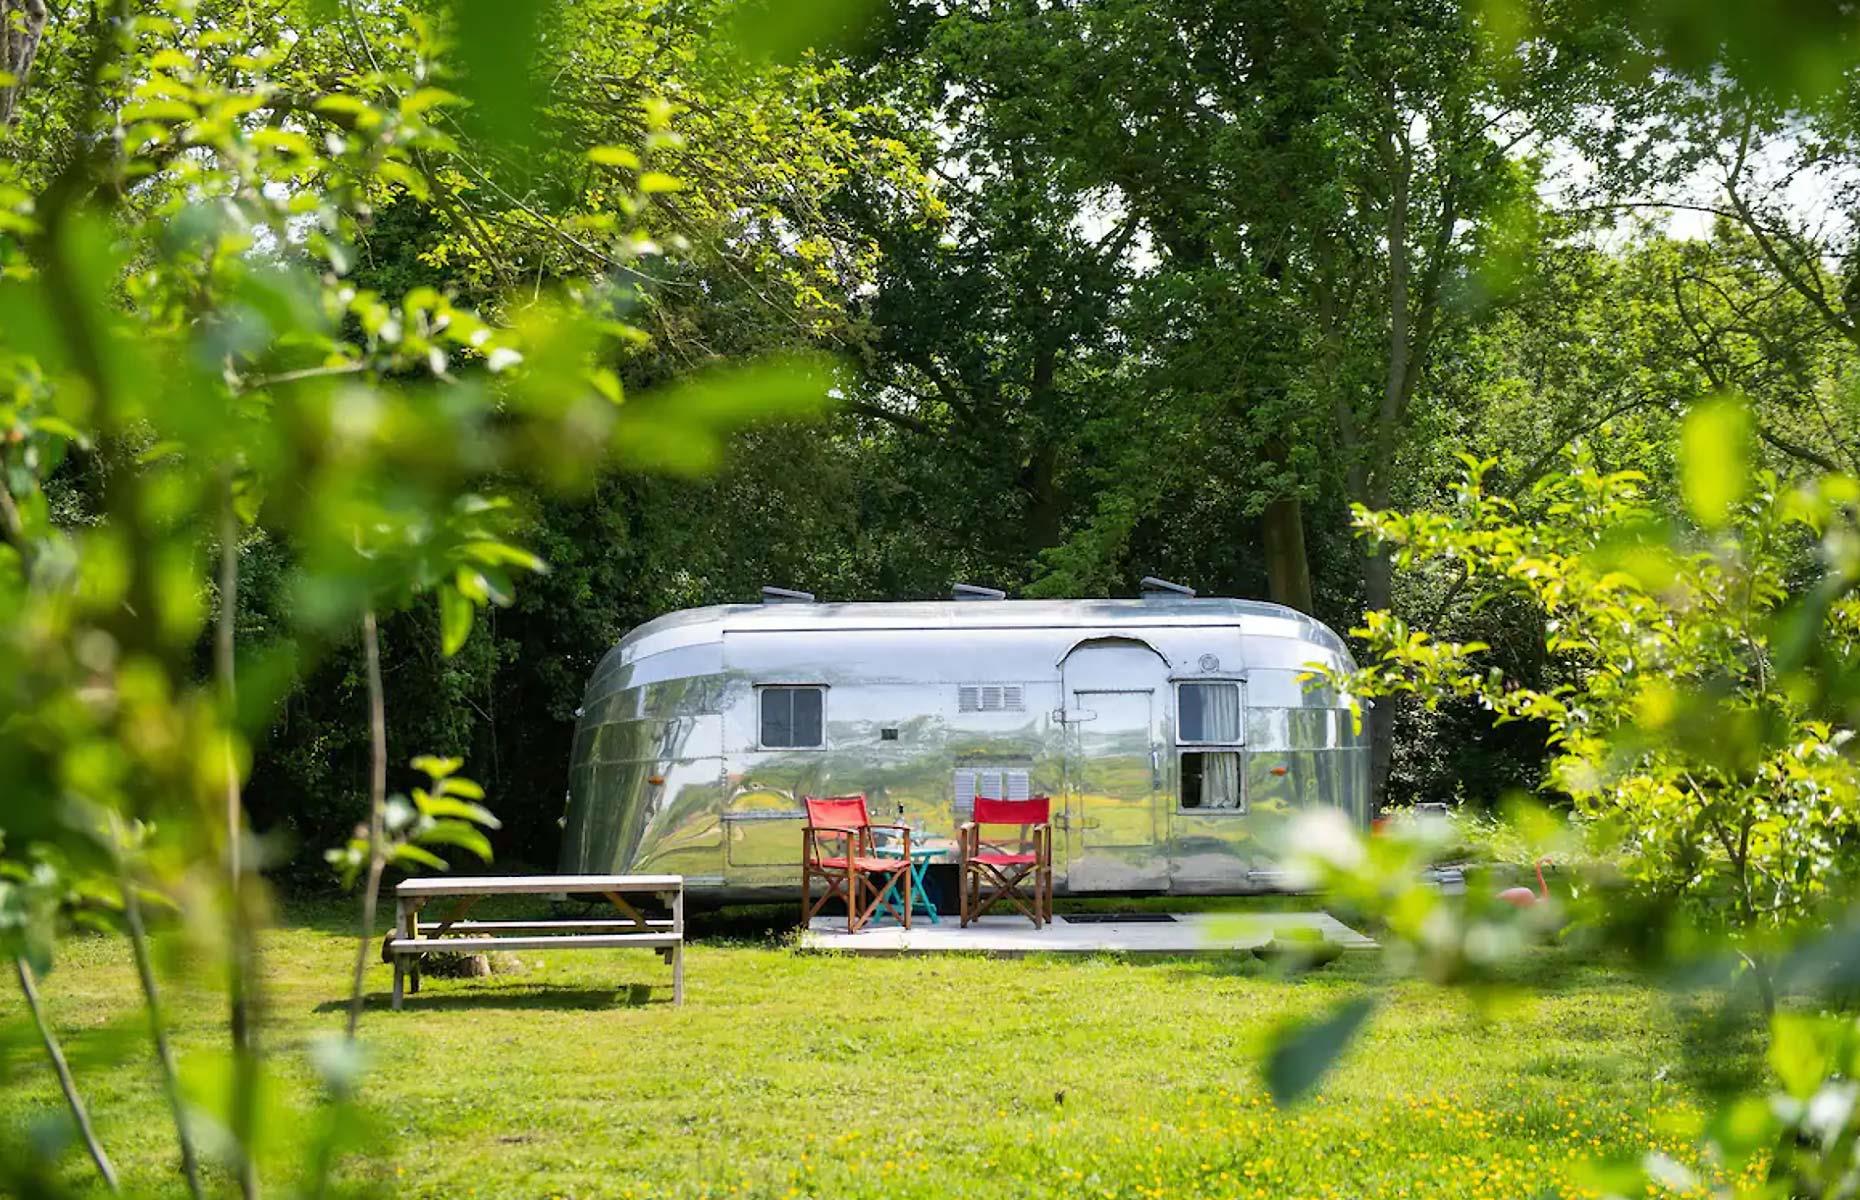 <p>This funky retro Airstream in Mundham, England is available to <a href="https://www.airbnb.co.uk/rooms/18261133">rent on Airbnb</a>. The 1957 Caravanner is parked in a quiet clearing in picturesque woodlands, and is fully kitted out to accommodate a comfortable stay for a couple or young family. </p>